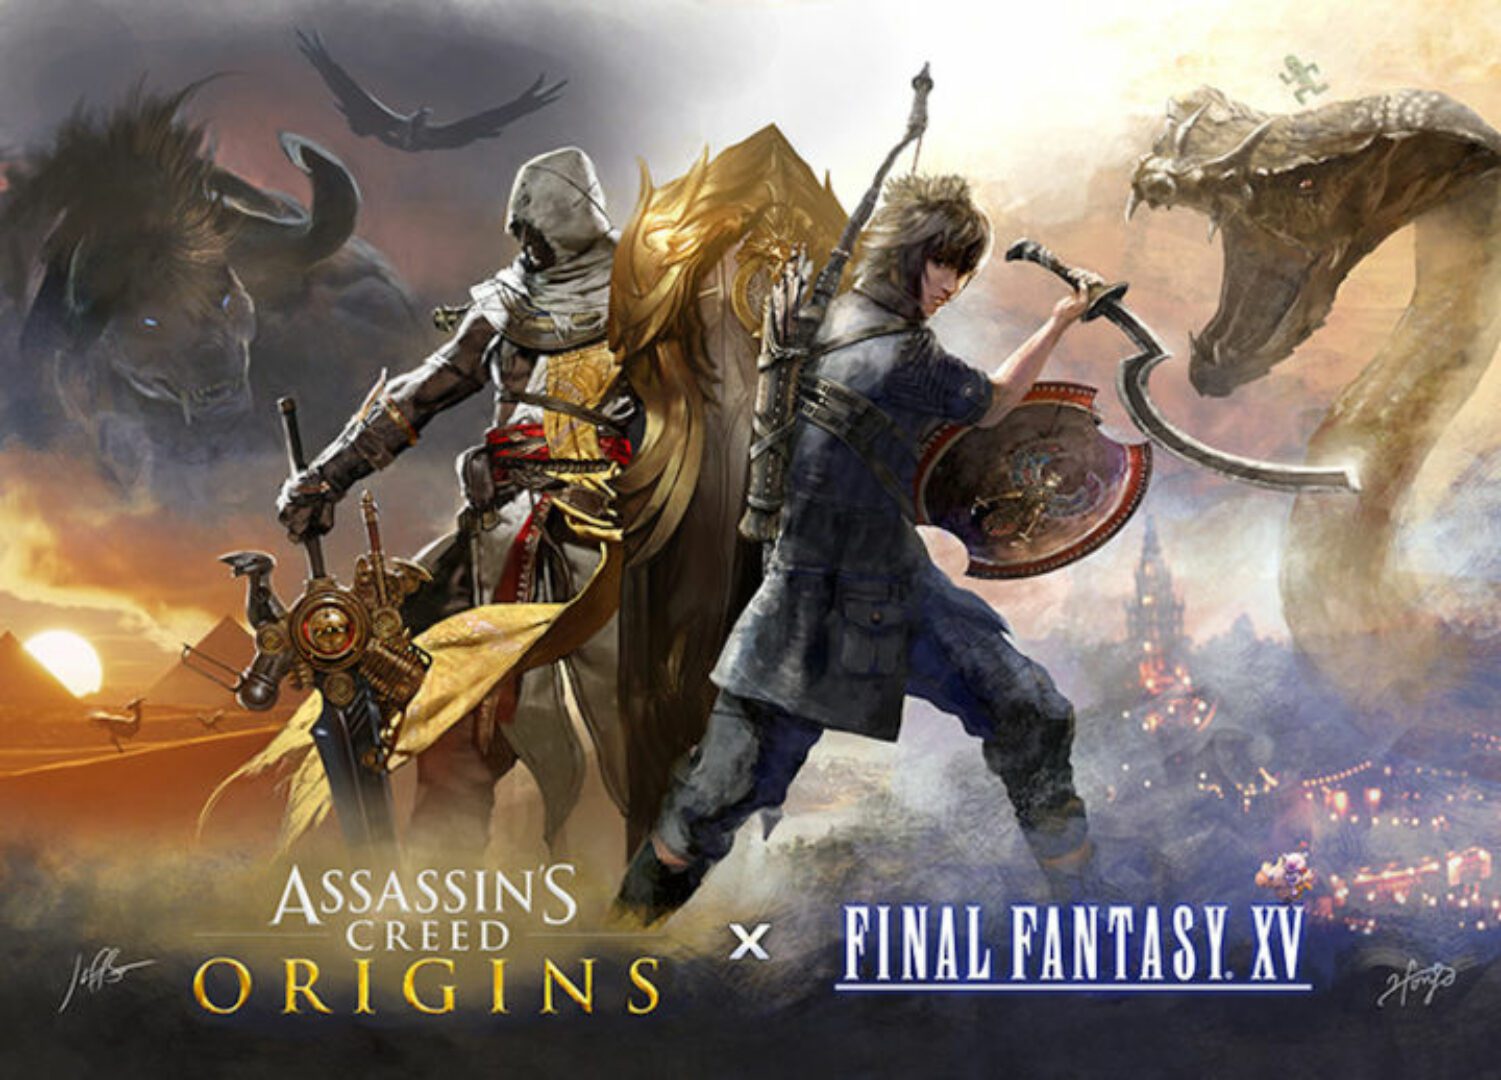 Crossover Between Assassin’s Creed And Final Fantasy XV Announced